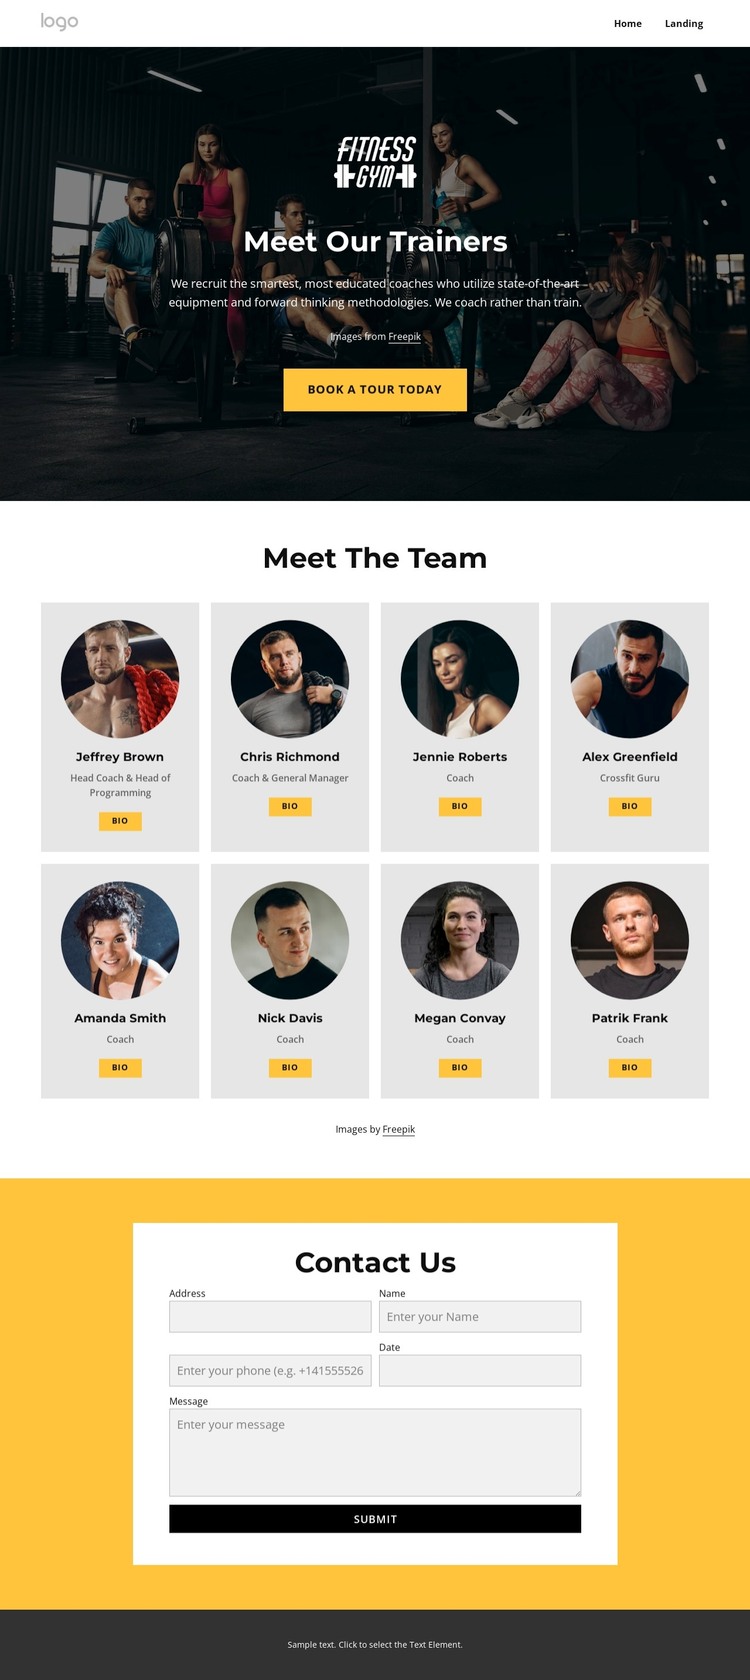 Meet our trainers WordPress Theme